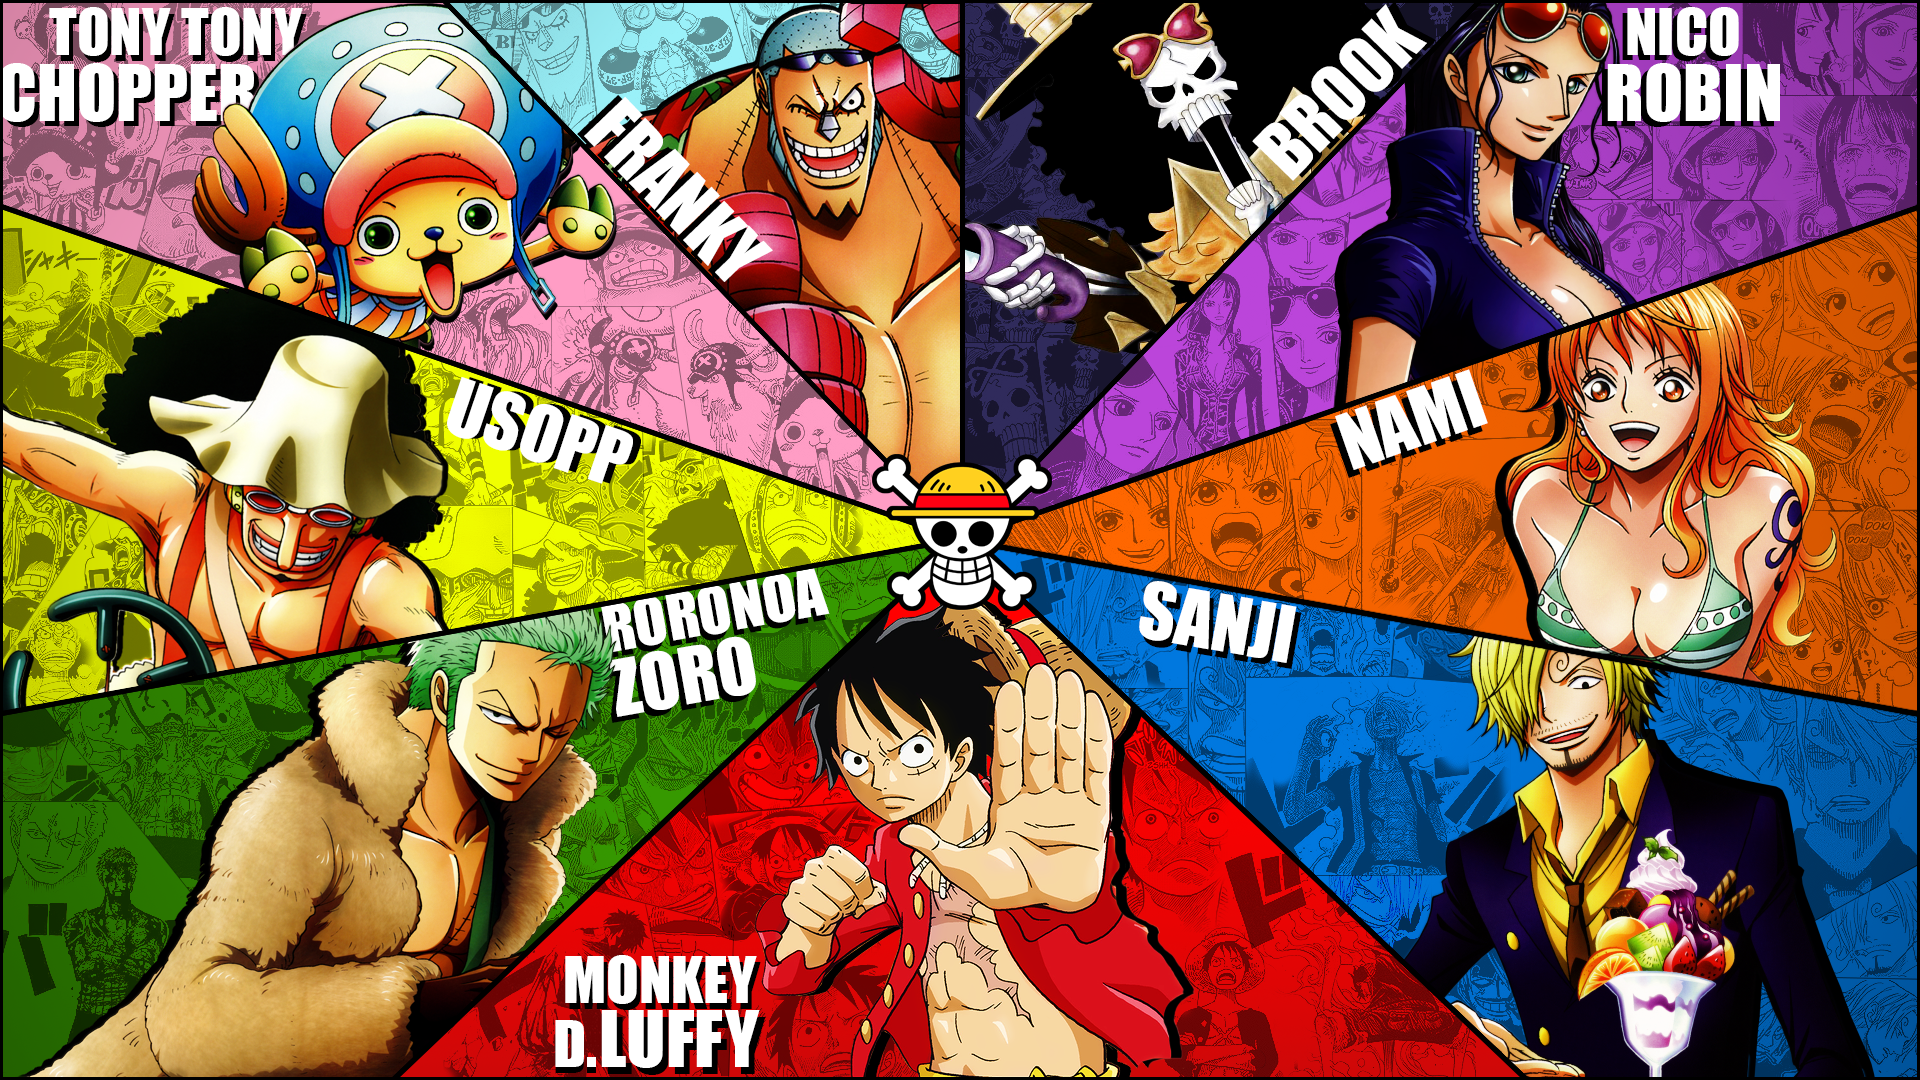 One Piece Mugiwaras wallpaper full hd 1080p by Marcos Inu on